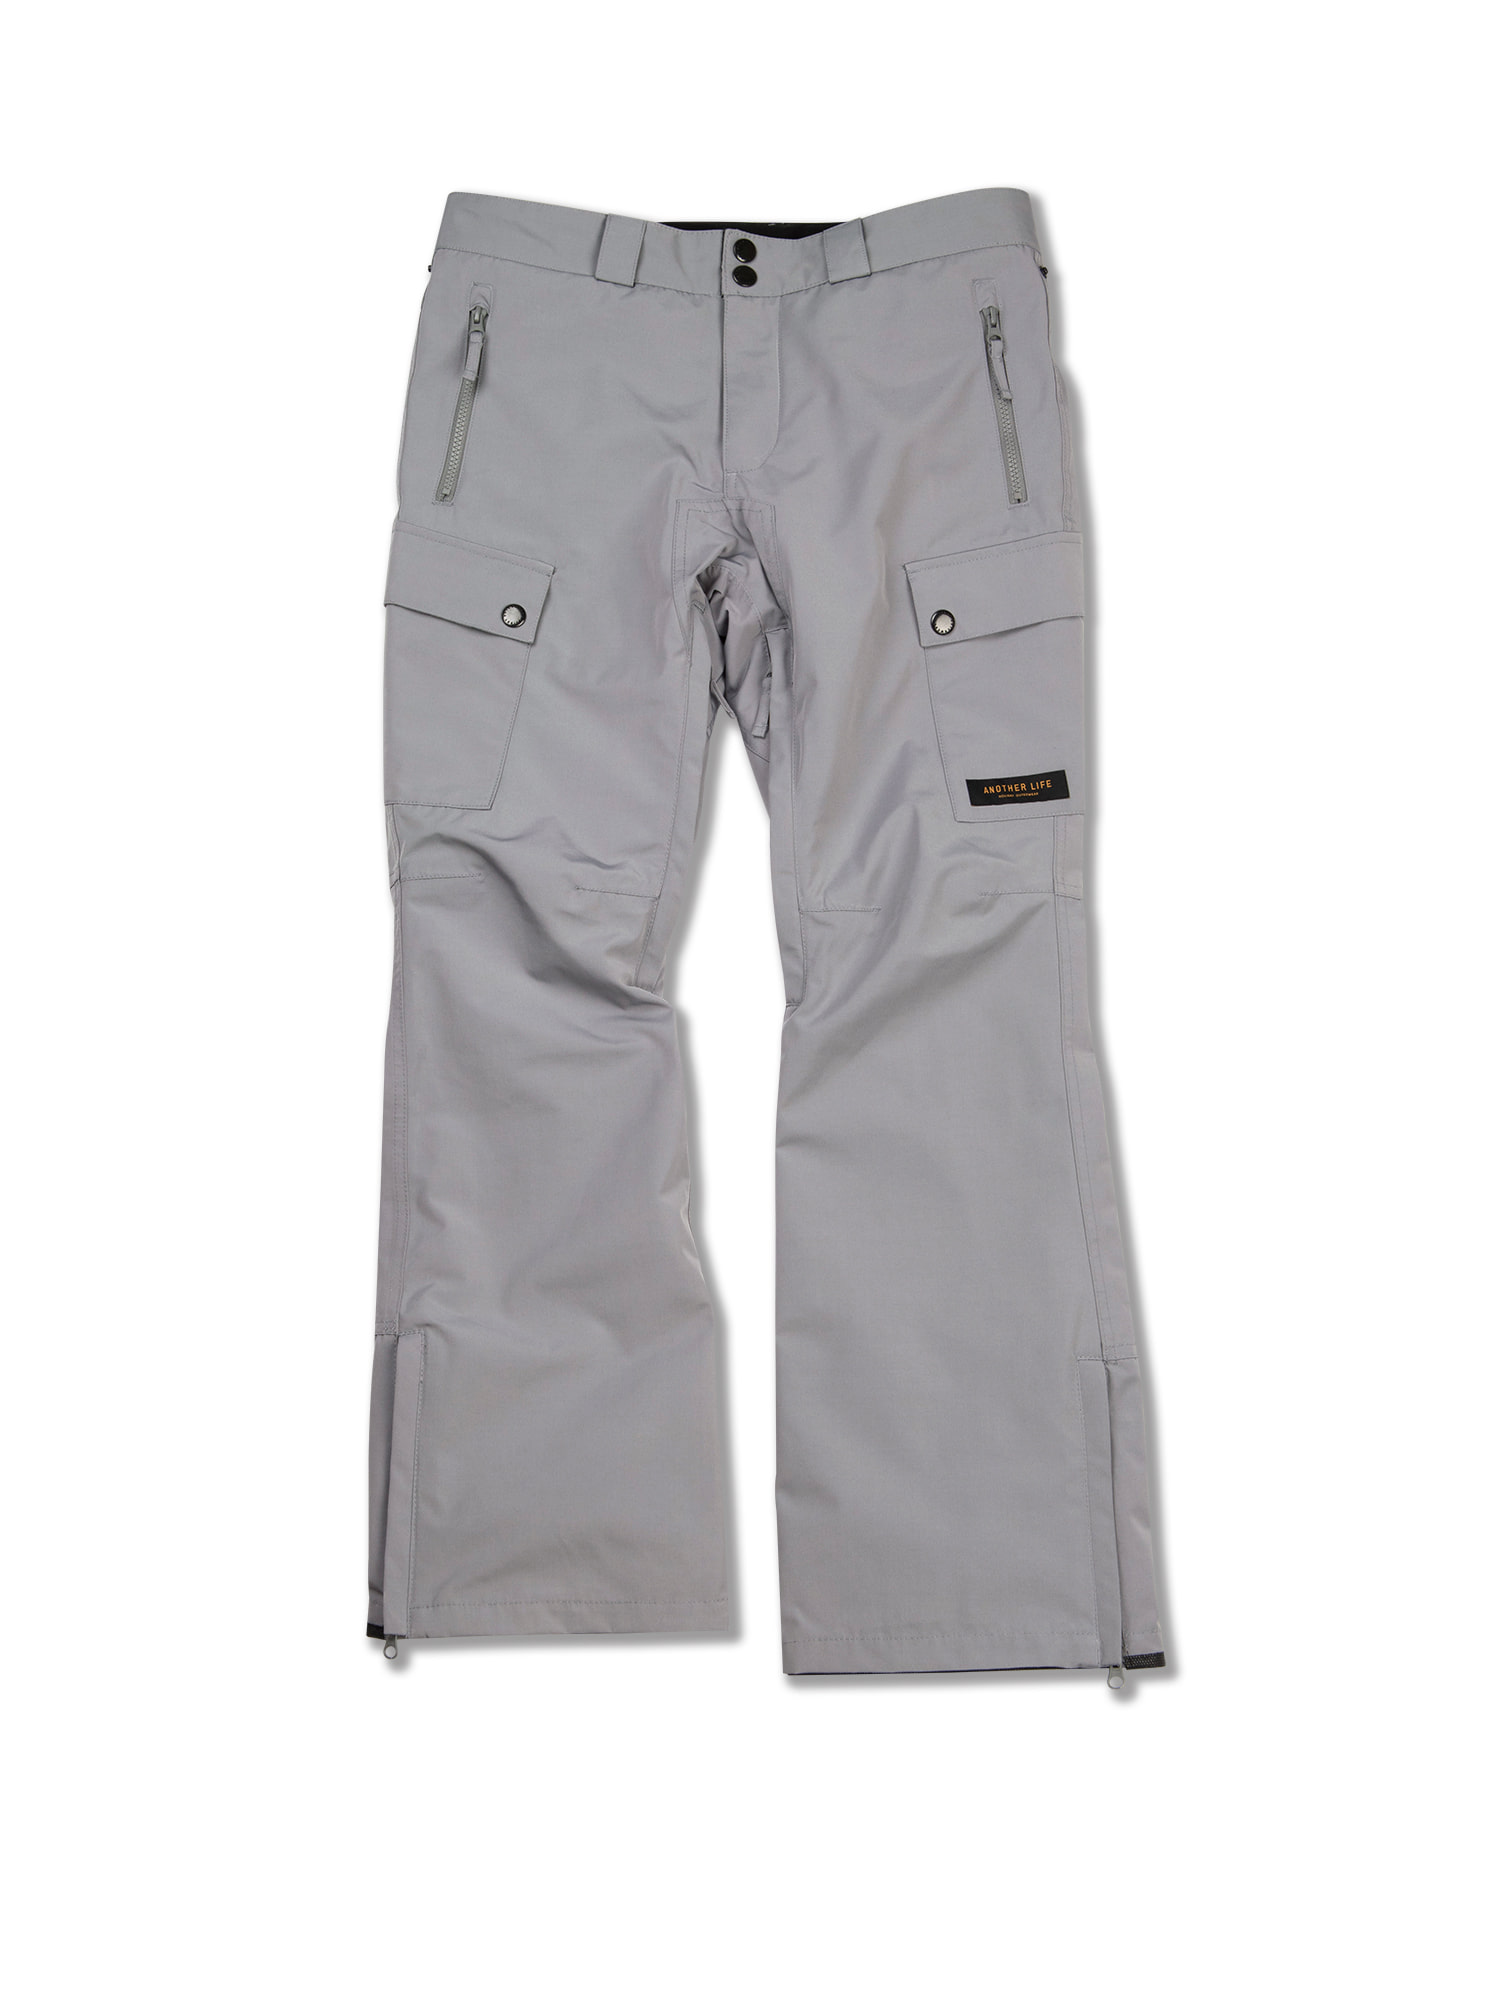 CHATTER pants - grayHOLIDAY OUTERWEAR